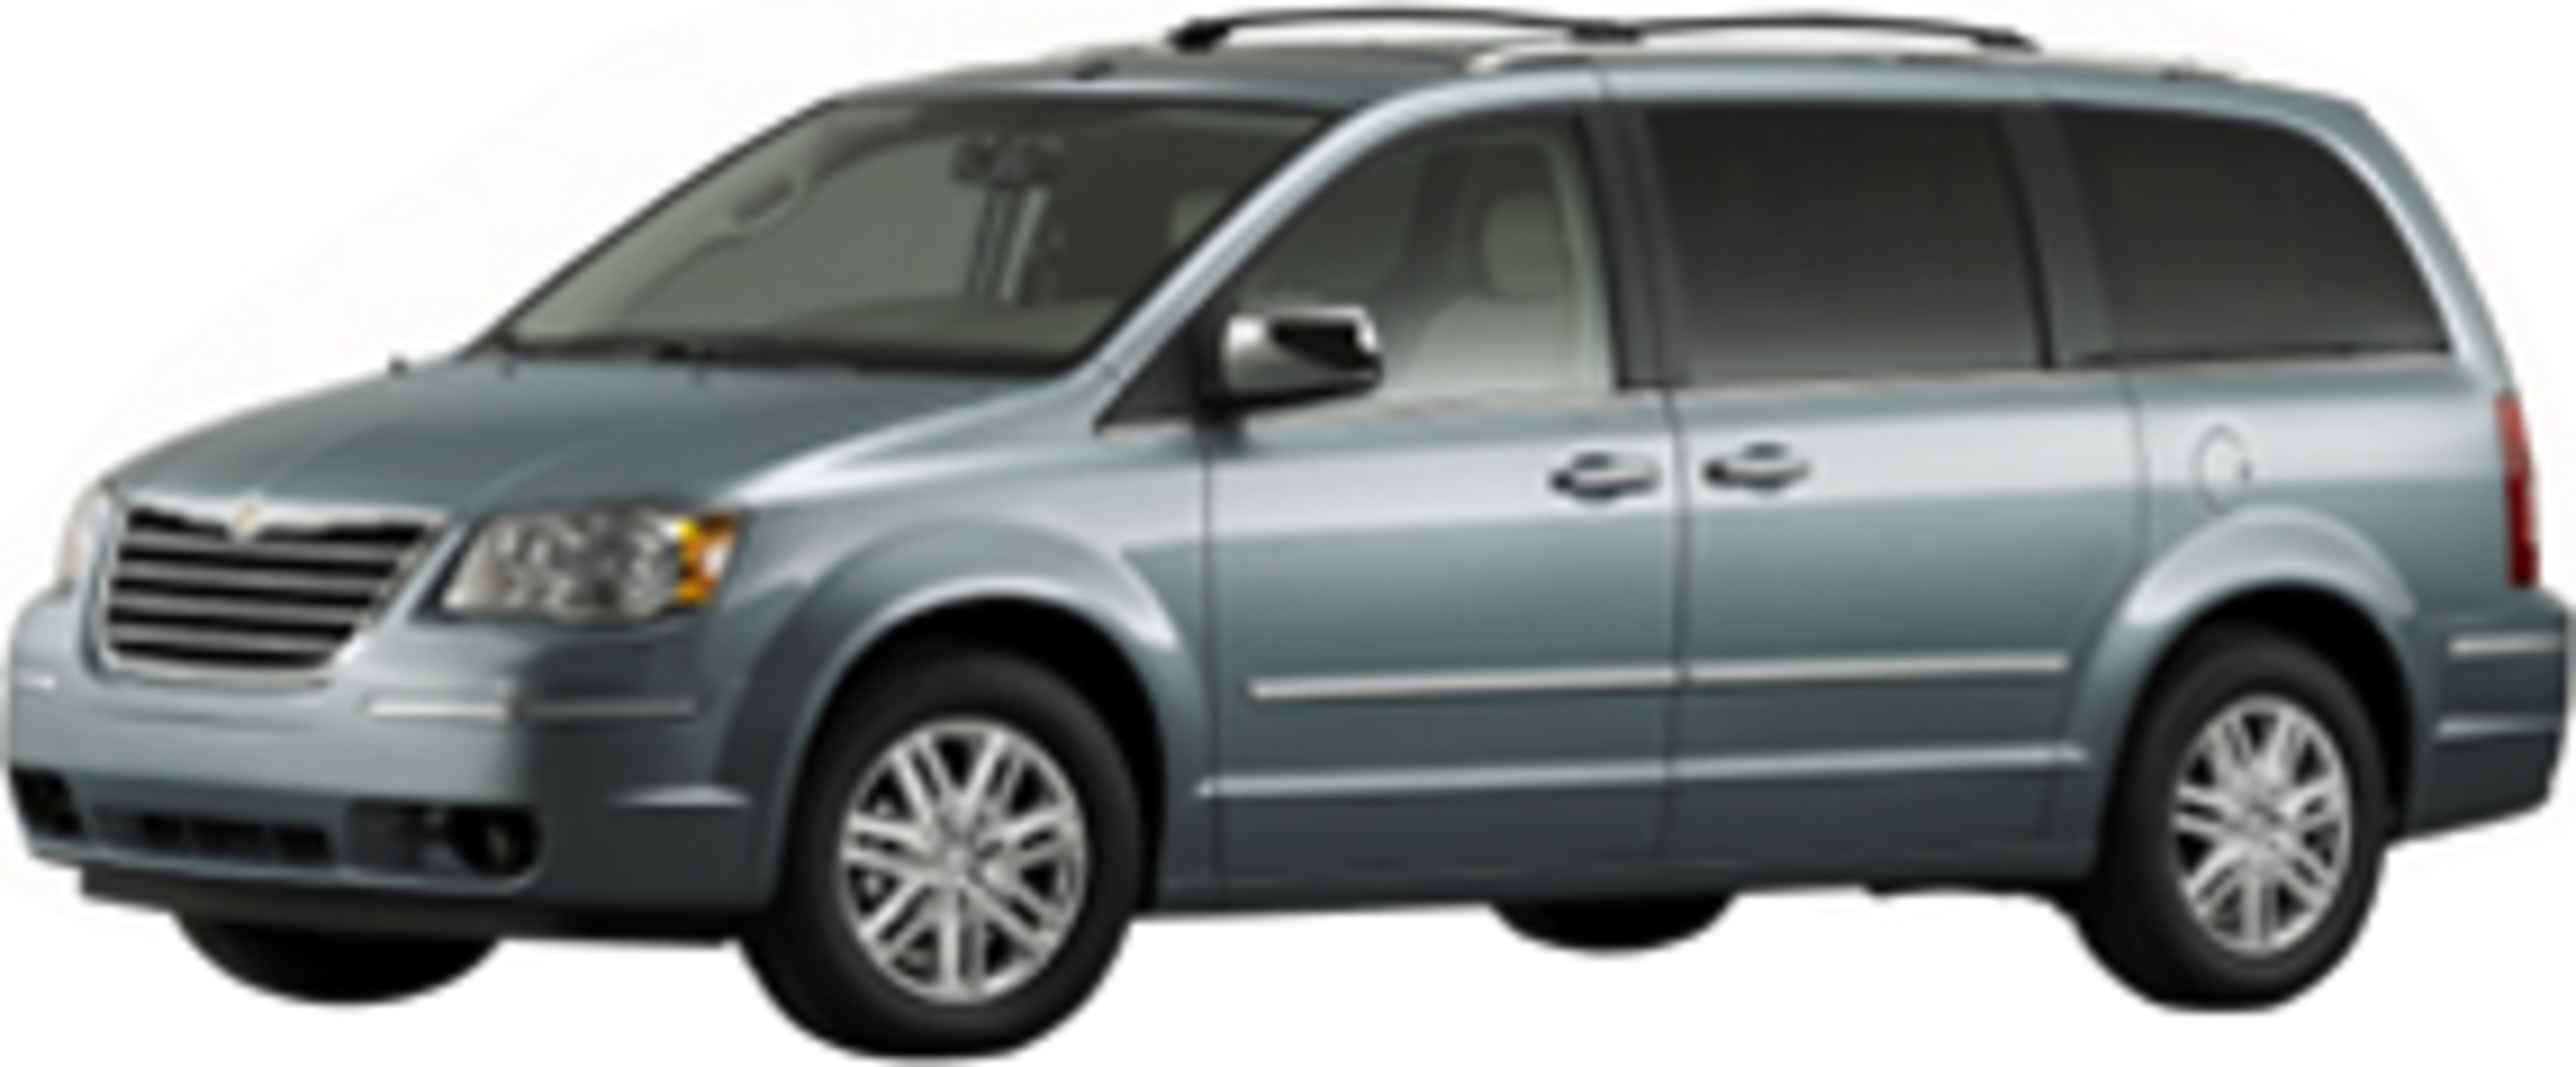 2008 Chrysler Town & Country Service and Repair Manual